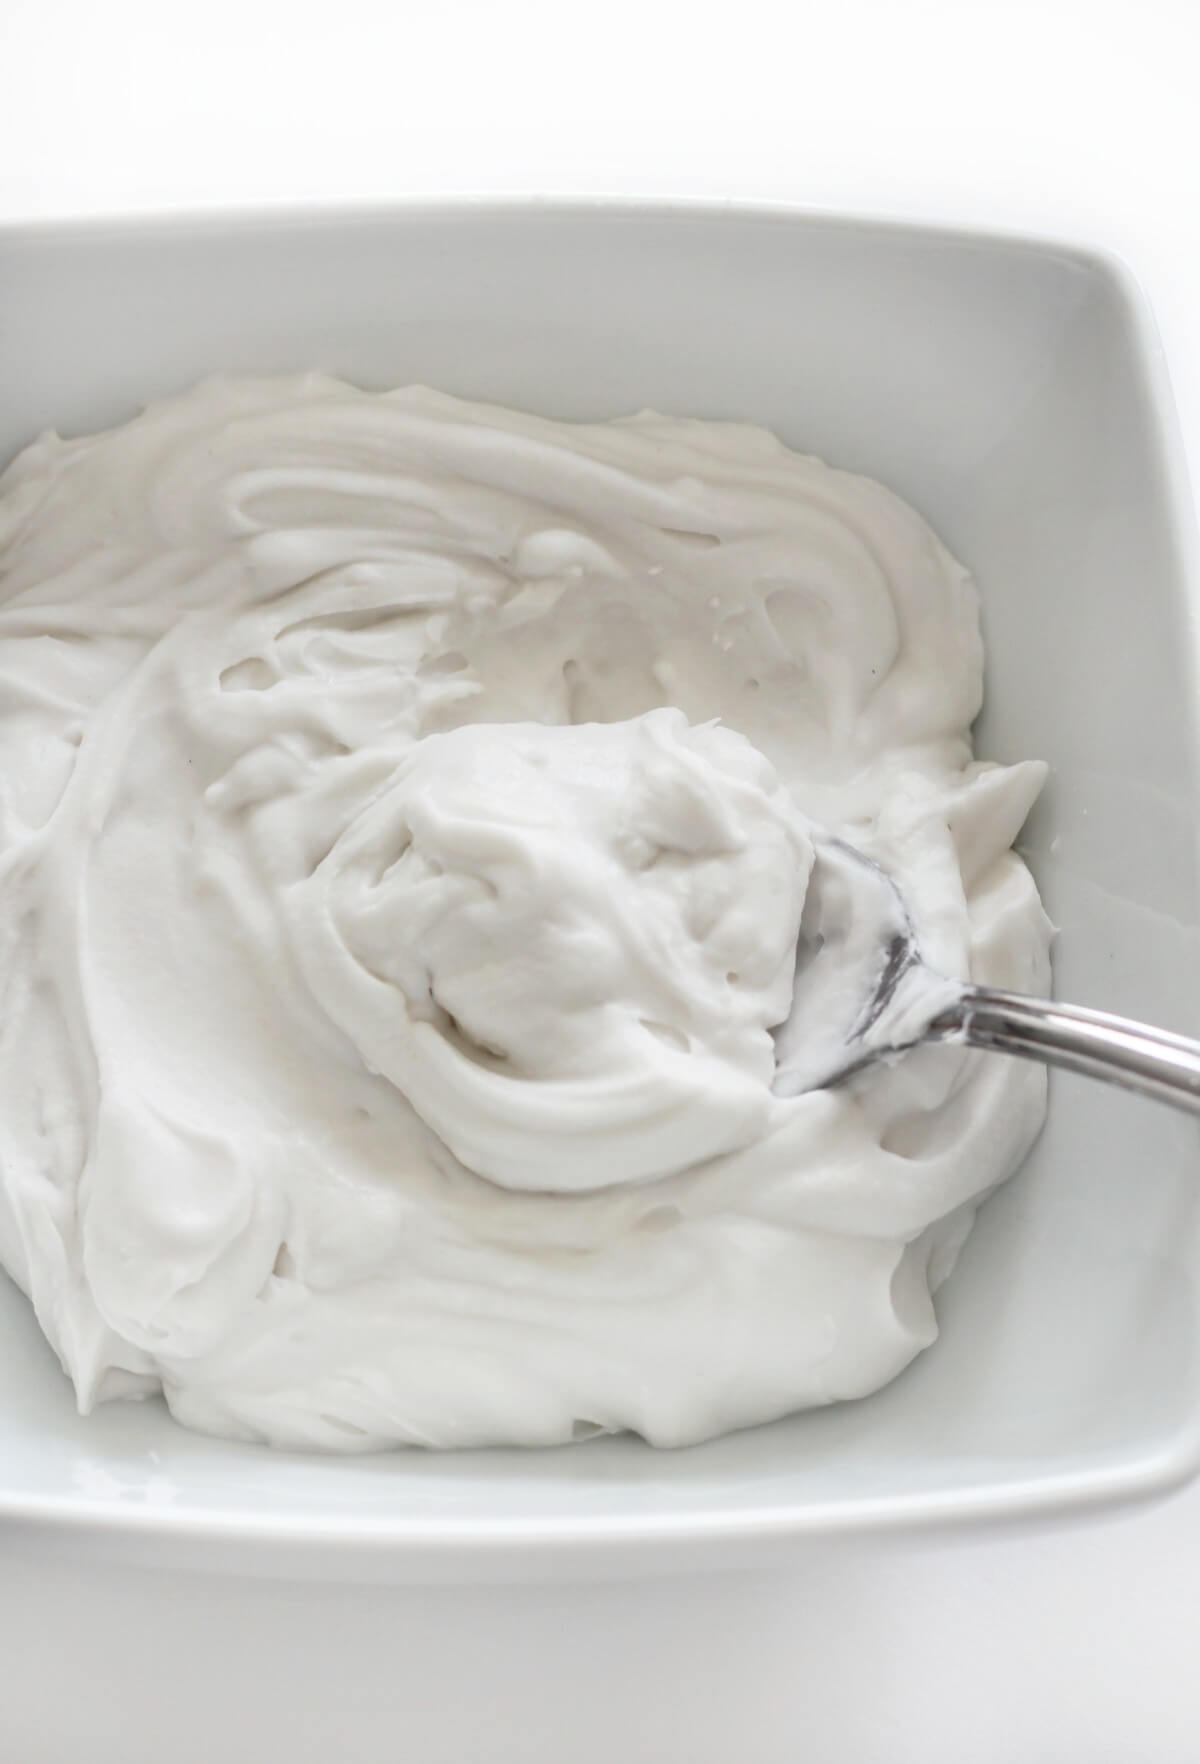 coconut whipped cream in bowl with spoon scoop